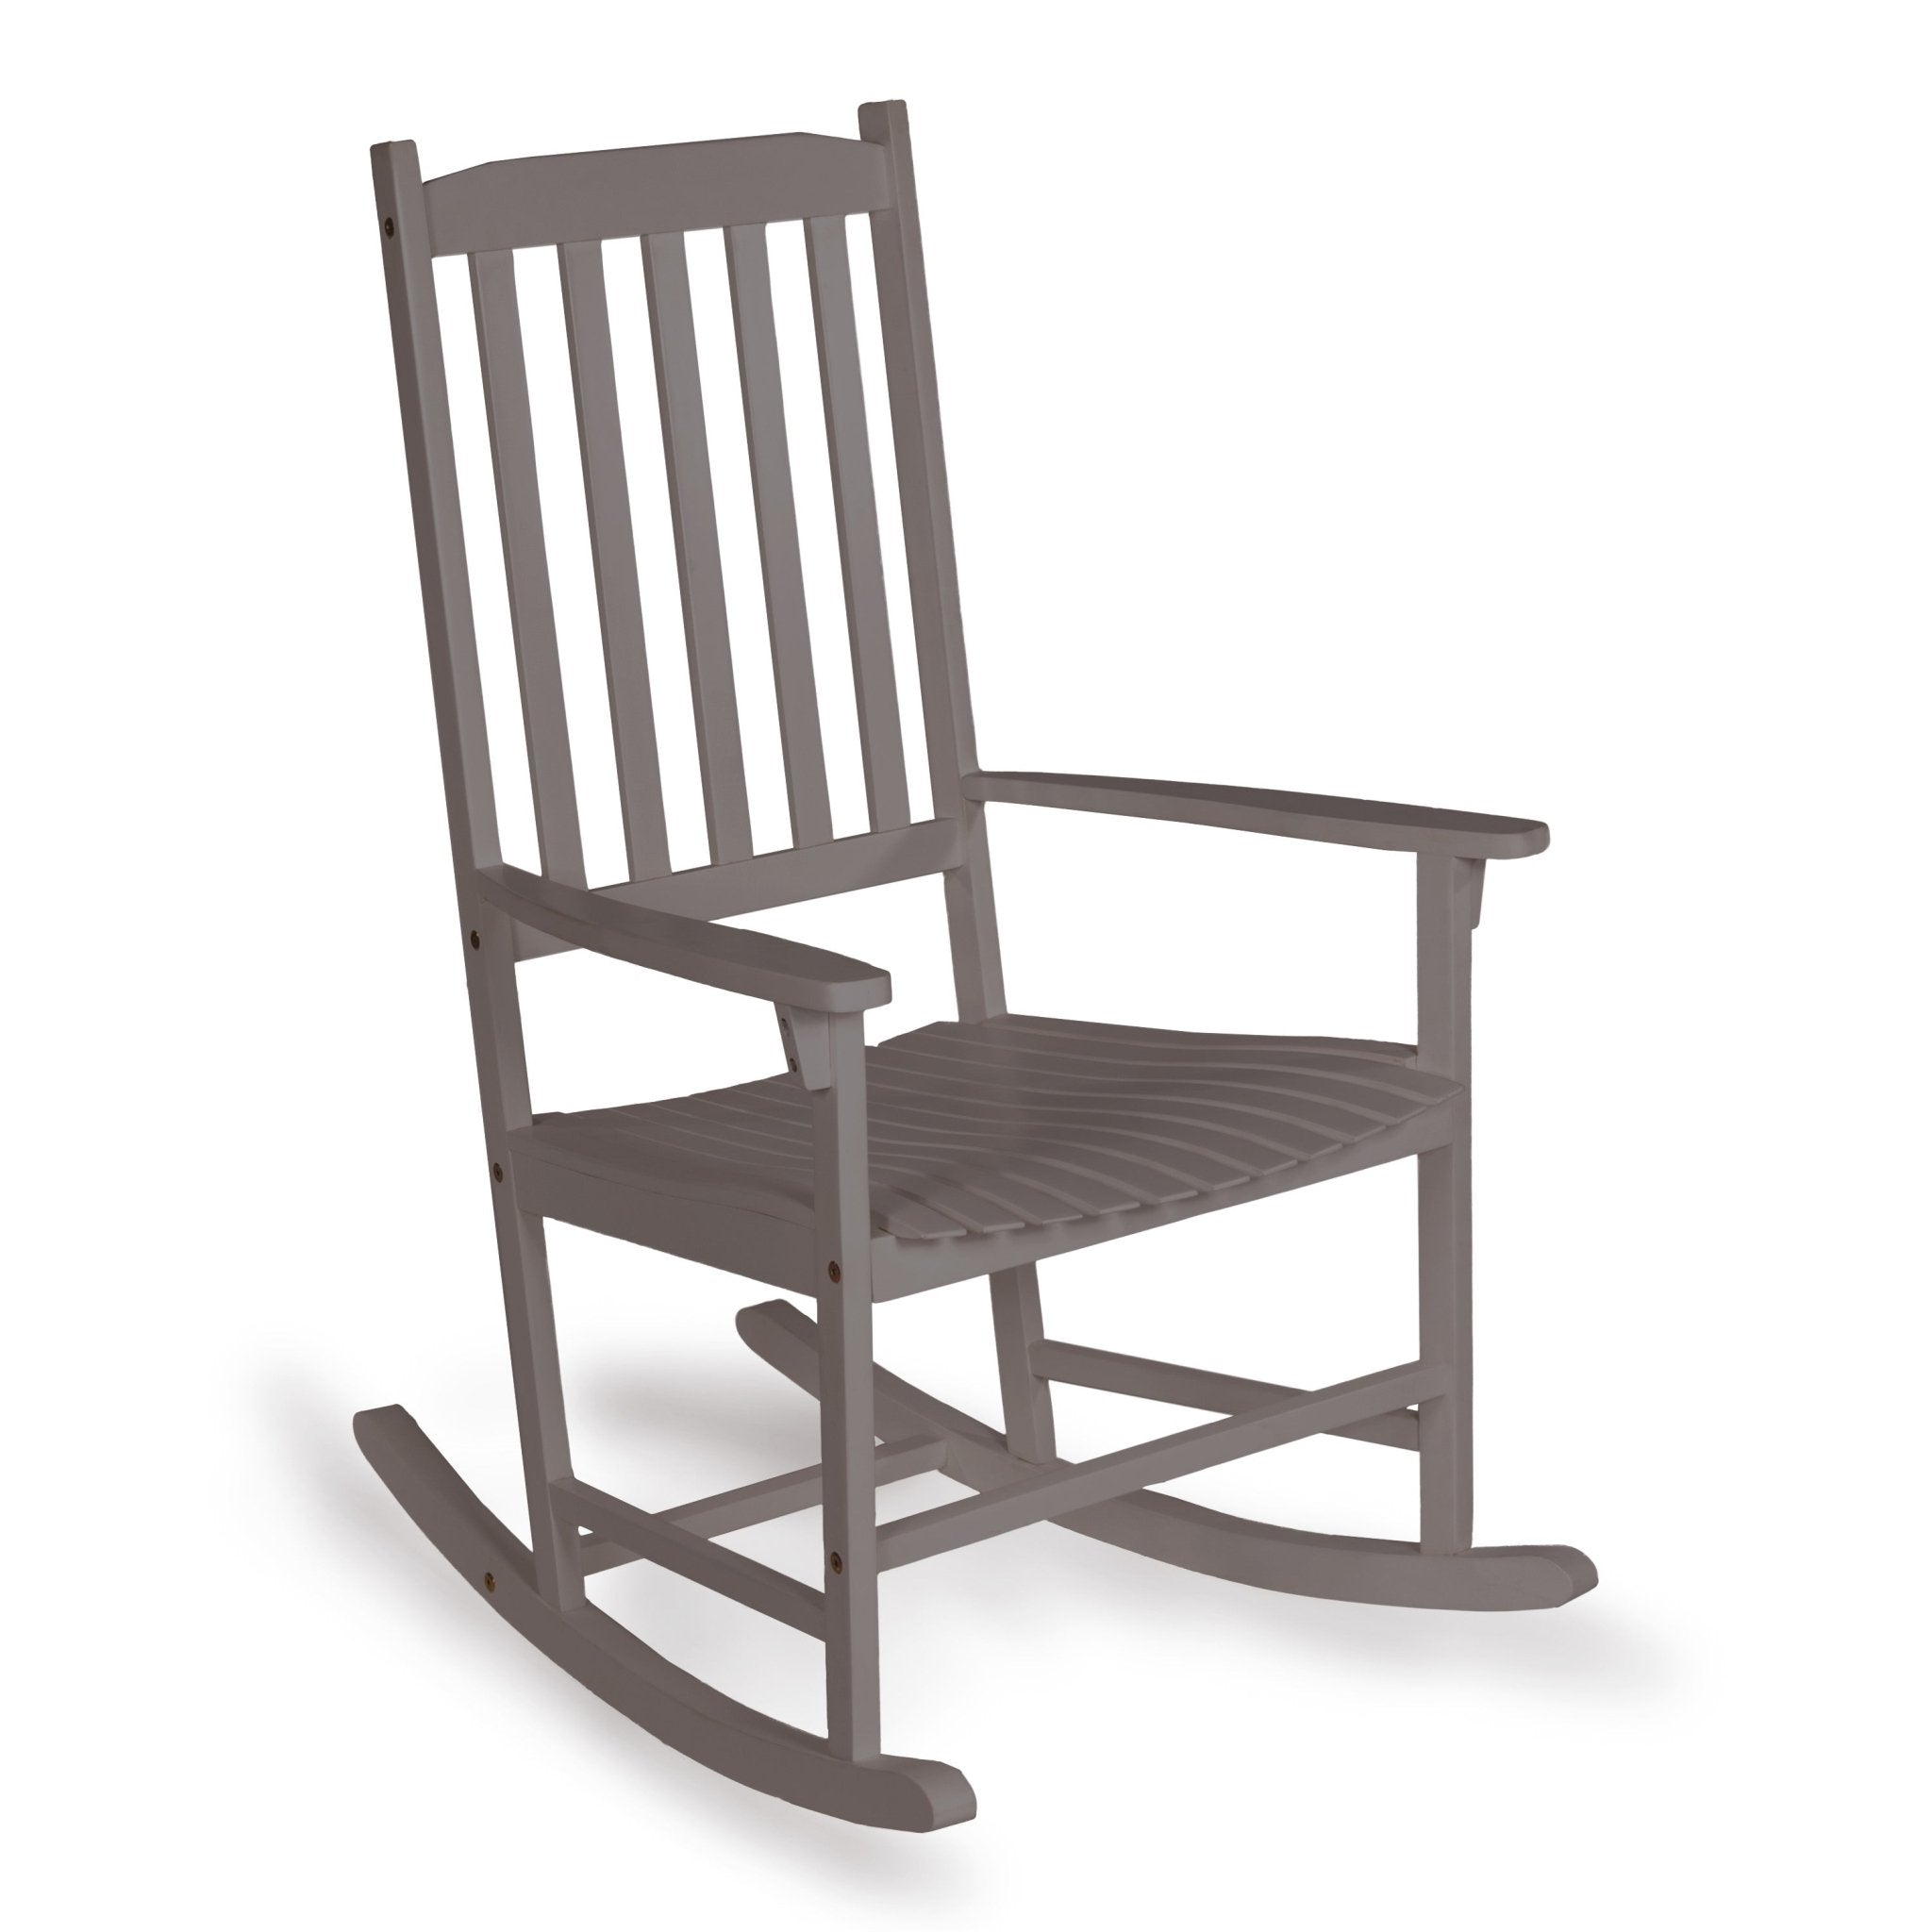 Seagrove Farmhouse Classic Slat-Back 350-LBS Support Acacia Wood Outdoor Rocking Chair, Gray Wash - Outdoor Rocking Chair